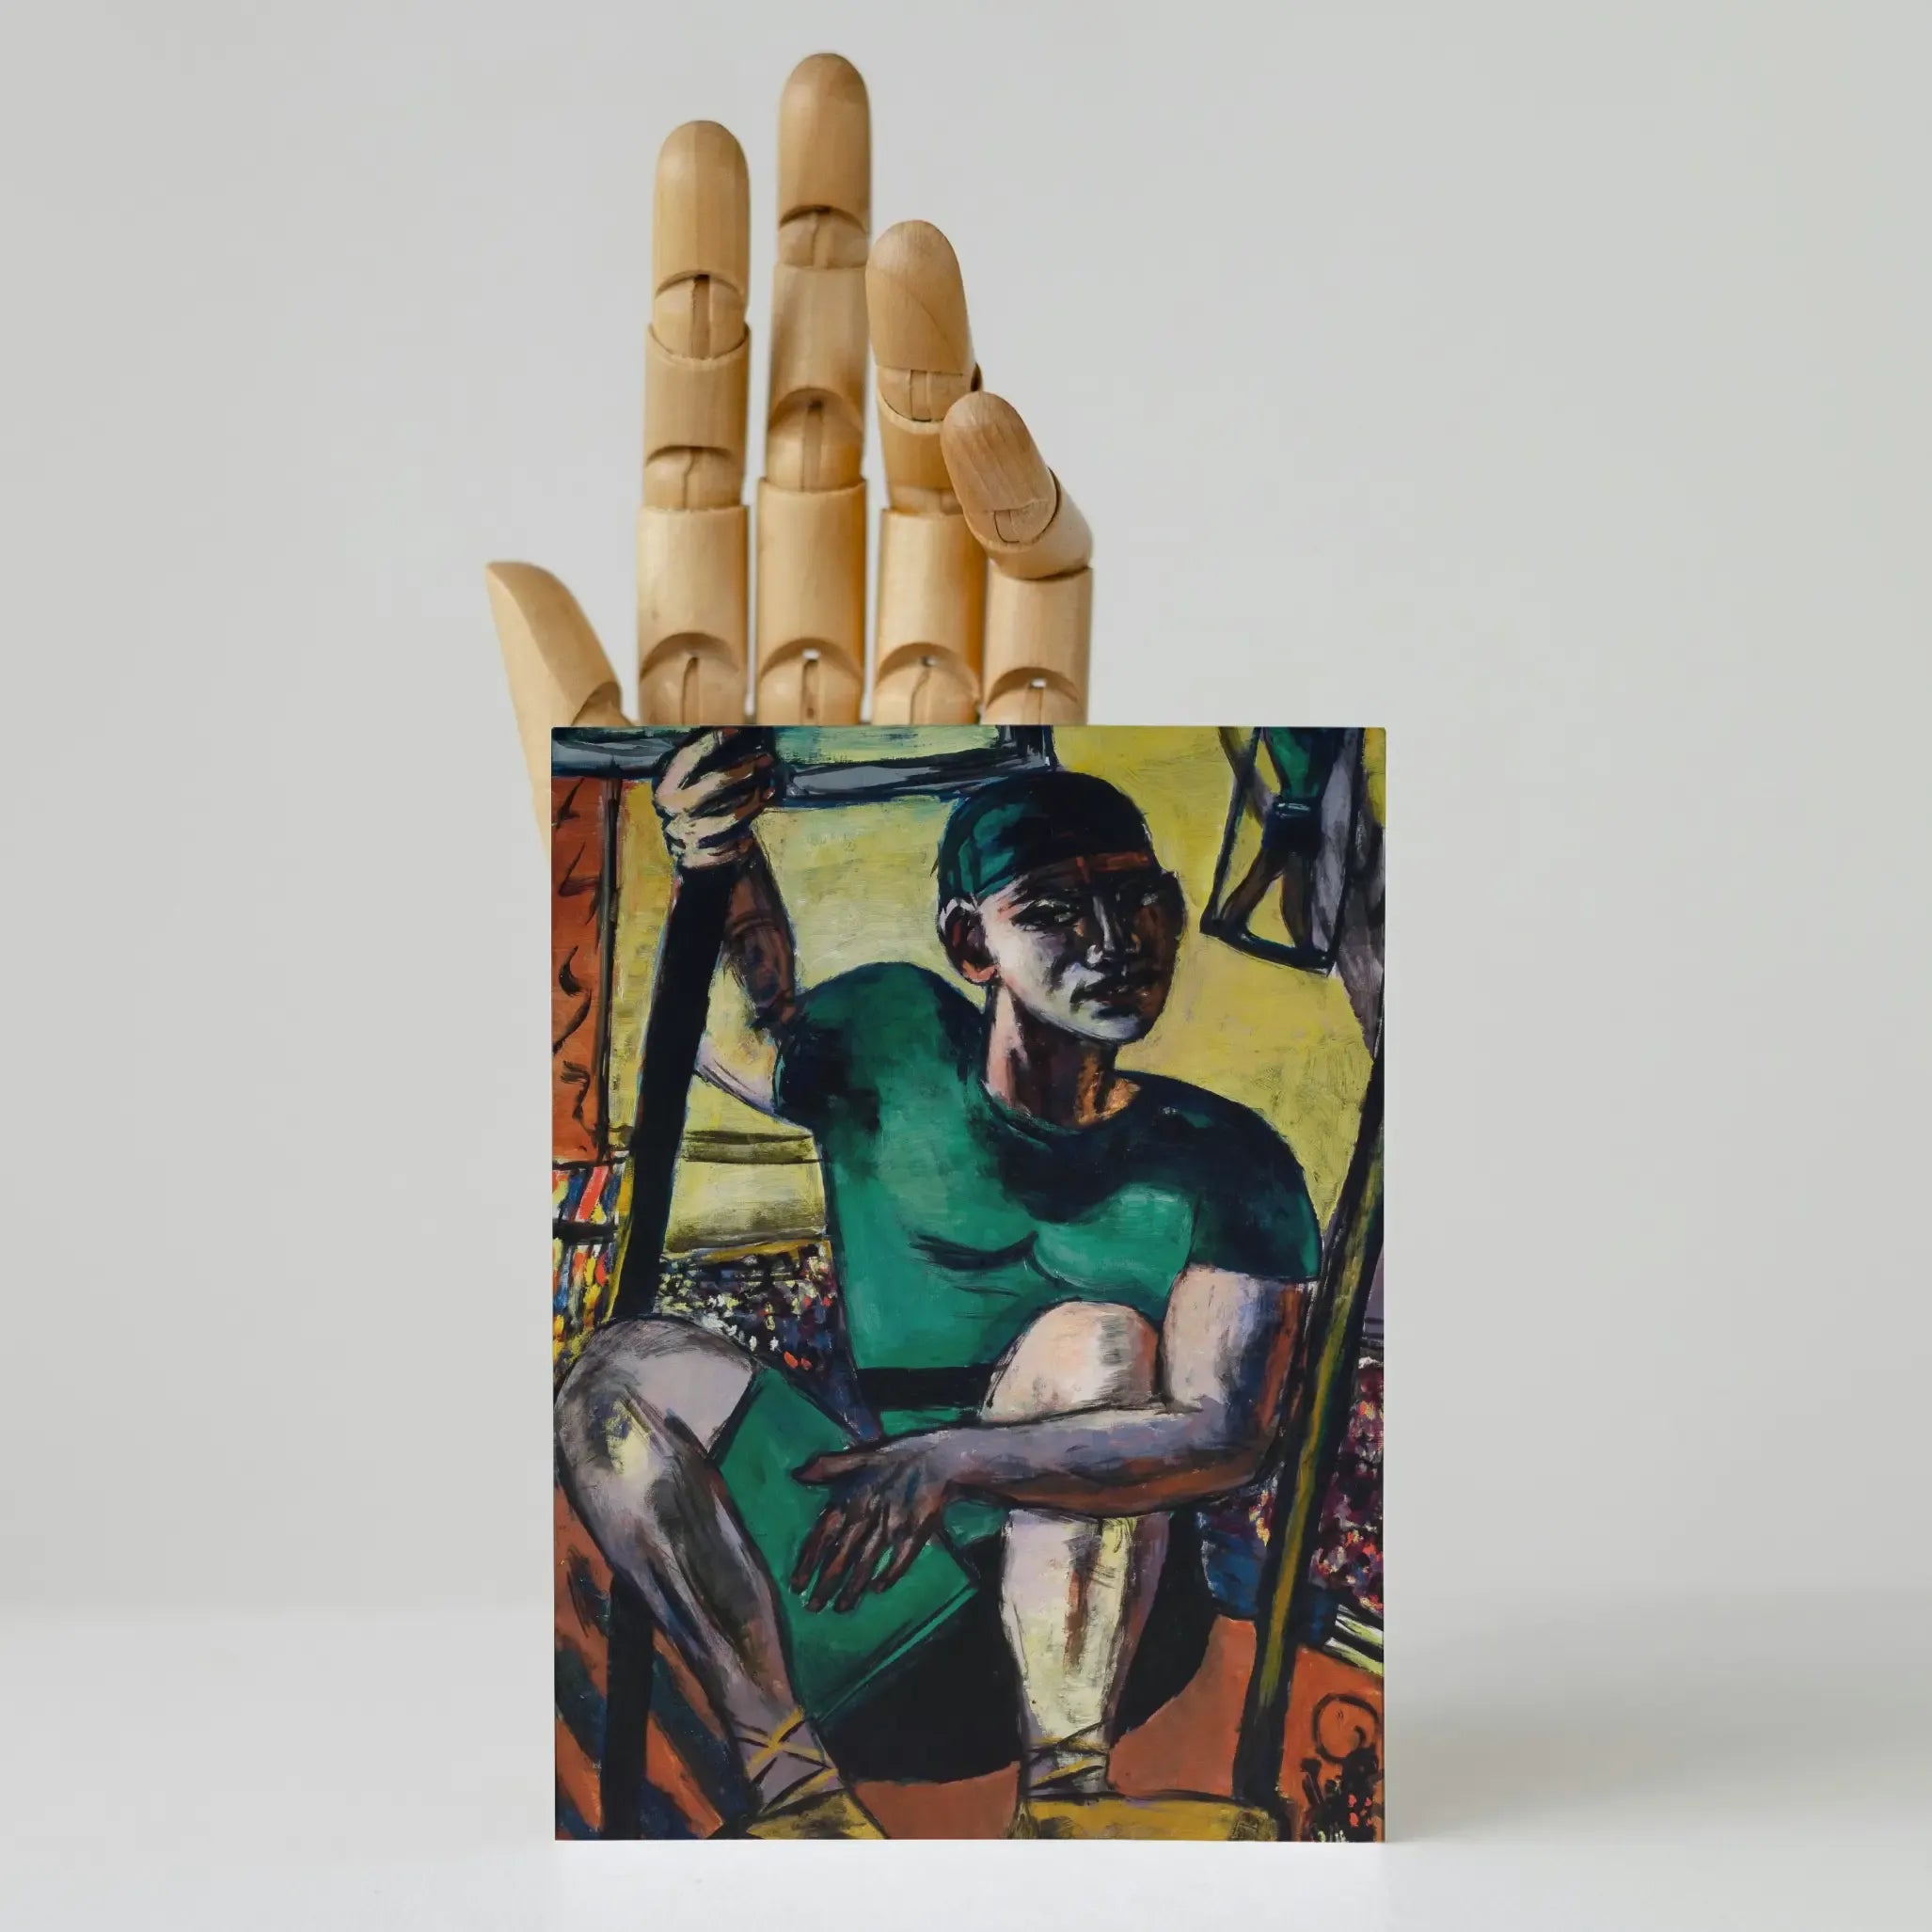 Acrobat On The Trapeze - Max Beckmann Greeting Card - Greeting & Note Cards - Aesthetic Art